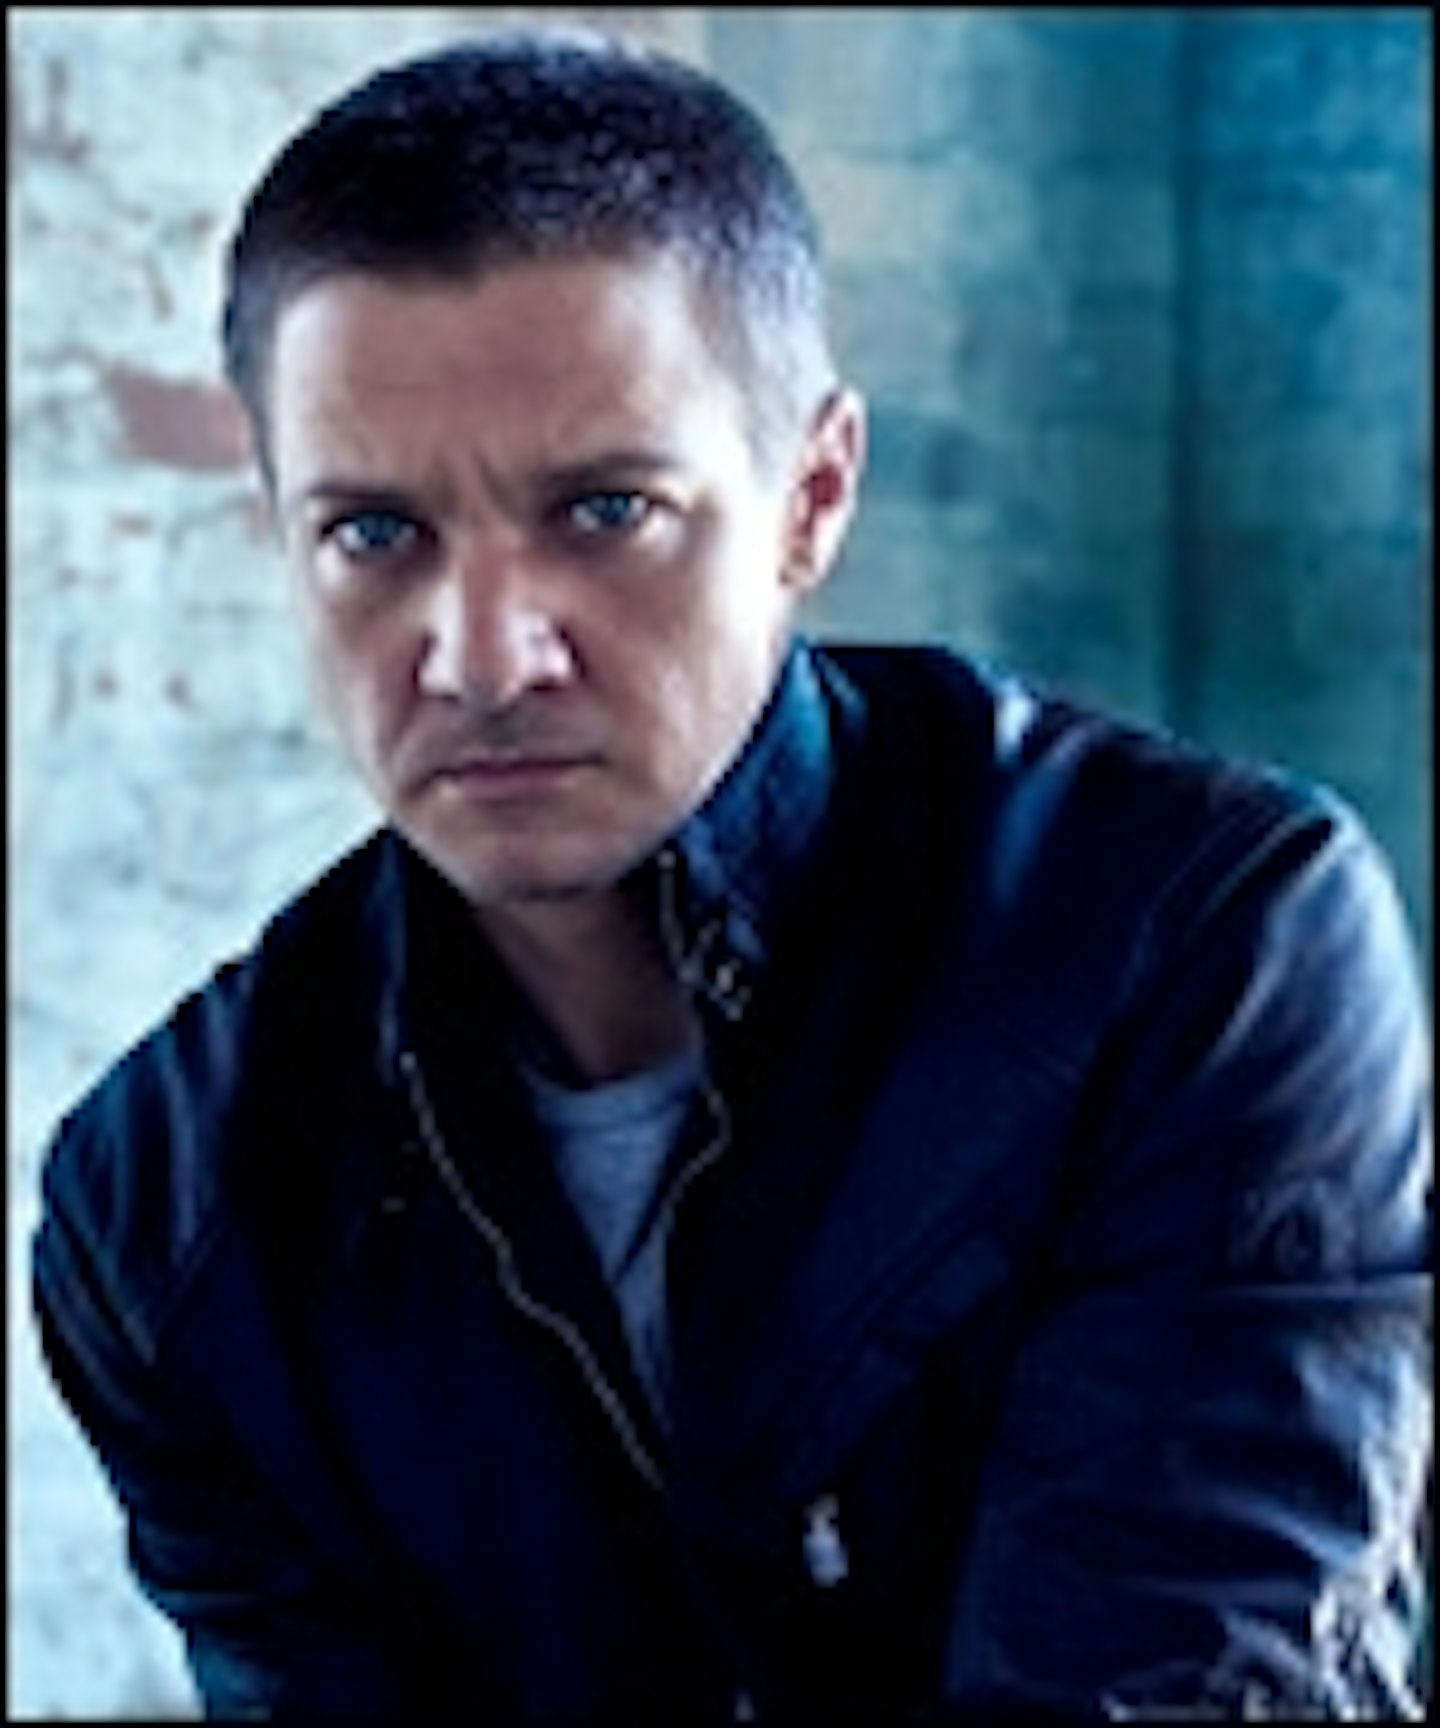 Empire's New Bourne Legacy Cover